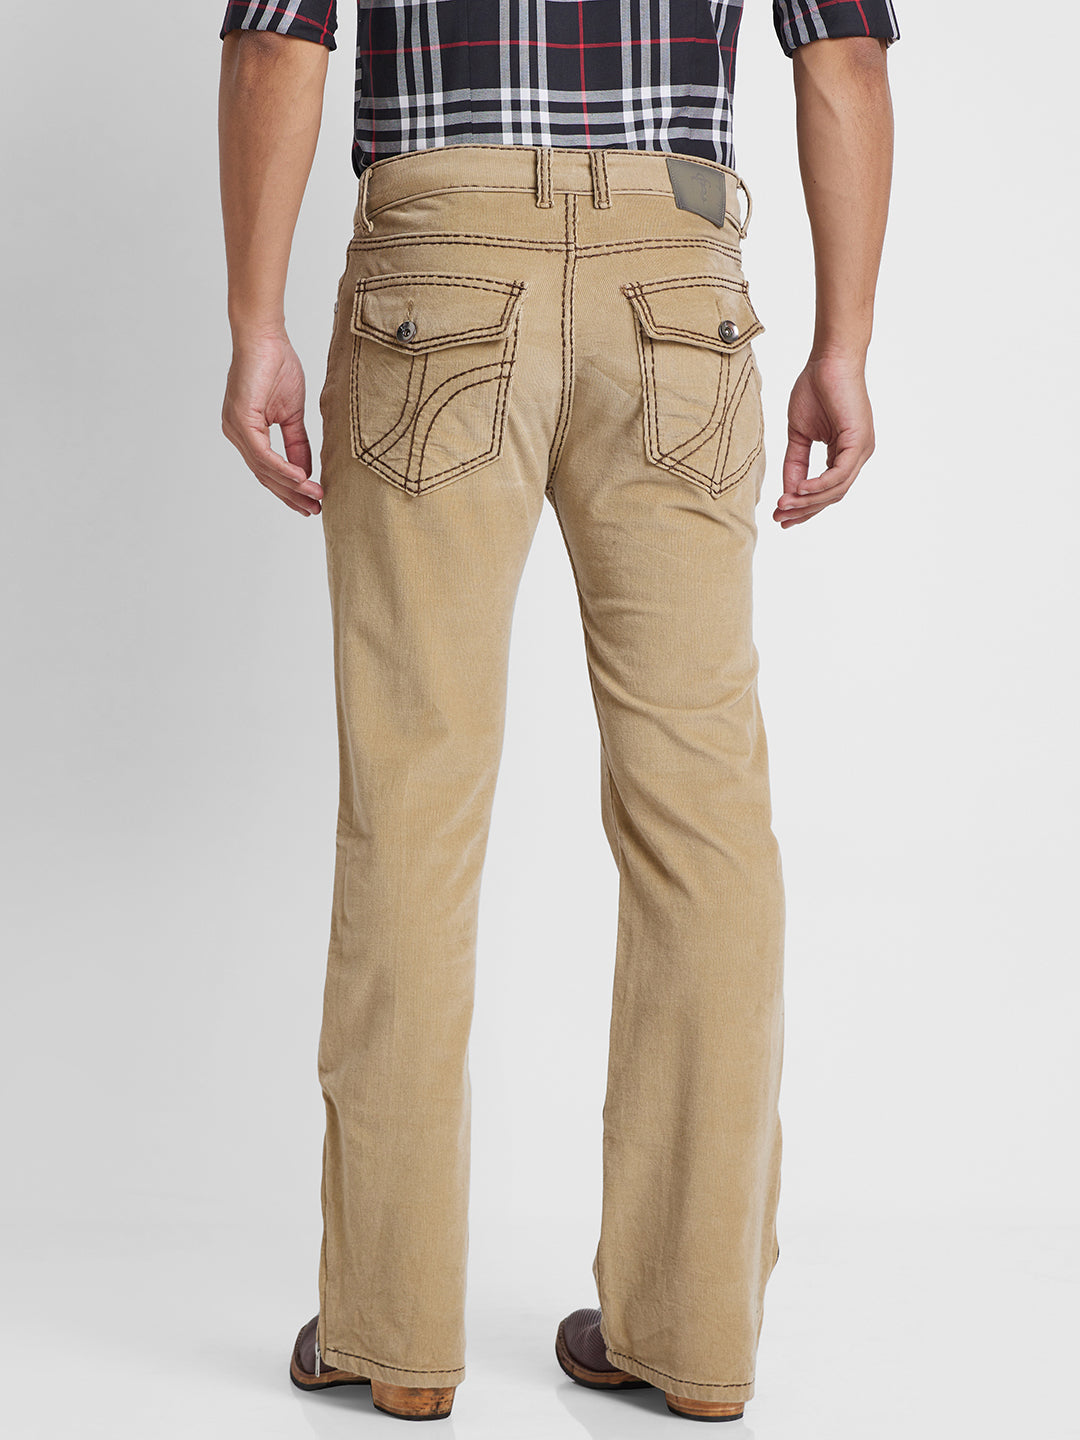 Beige Bootcut Corduroy With Brown Saddle Stitch And Bottom Zipper